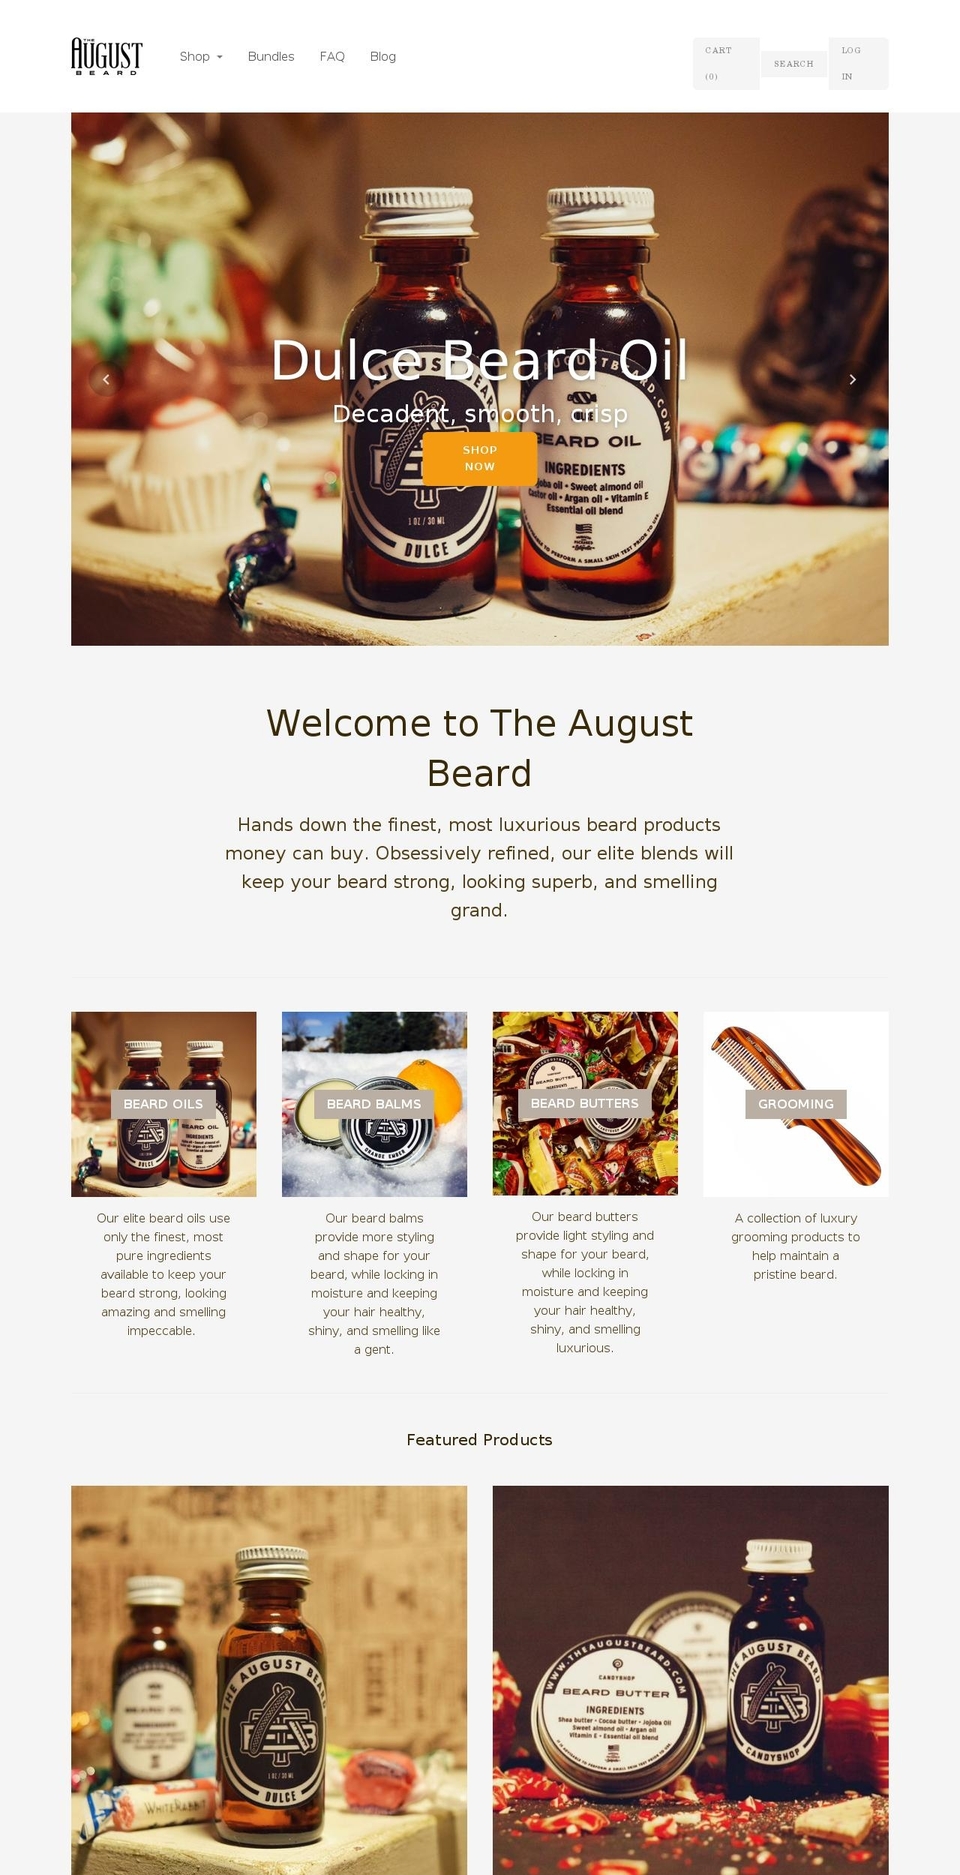 Cypress Shopify theme site example augustbeard.com